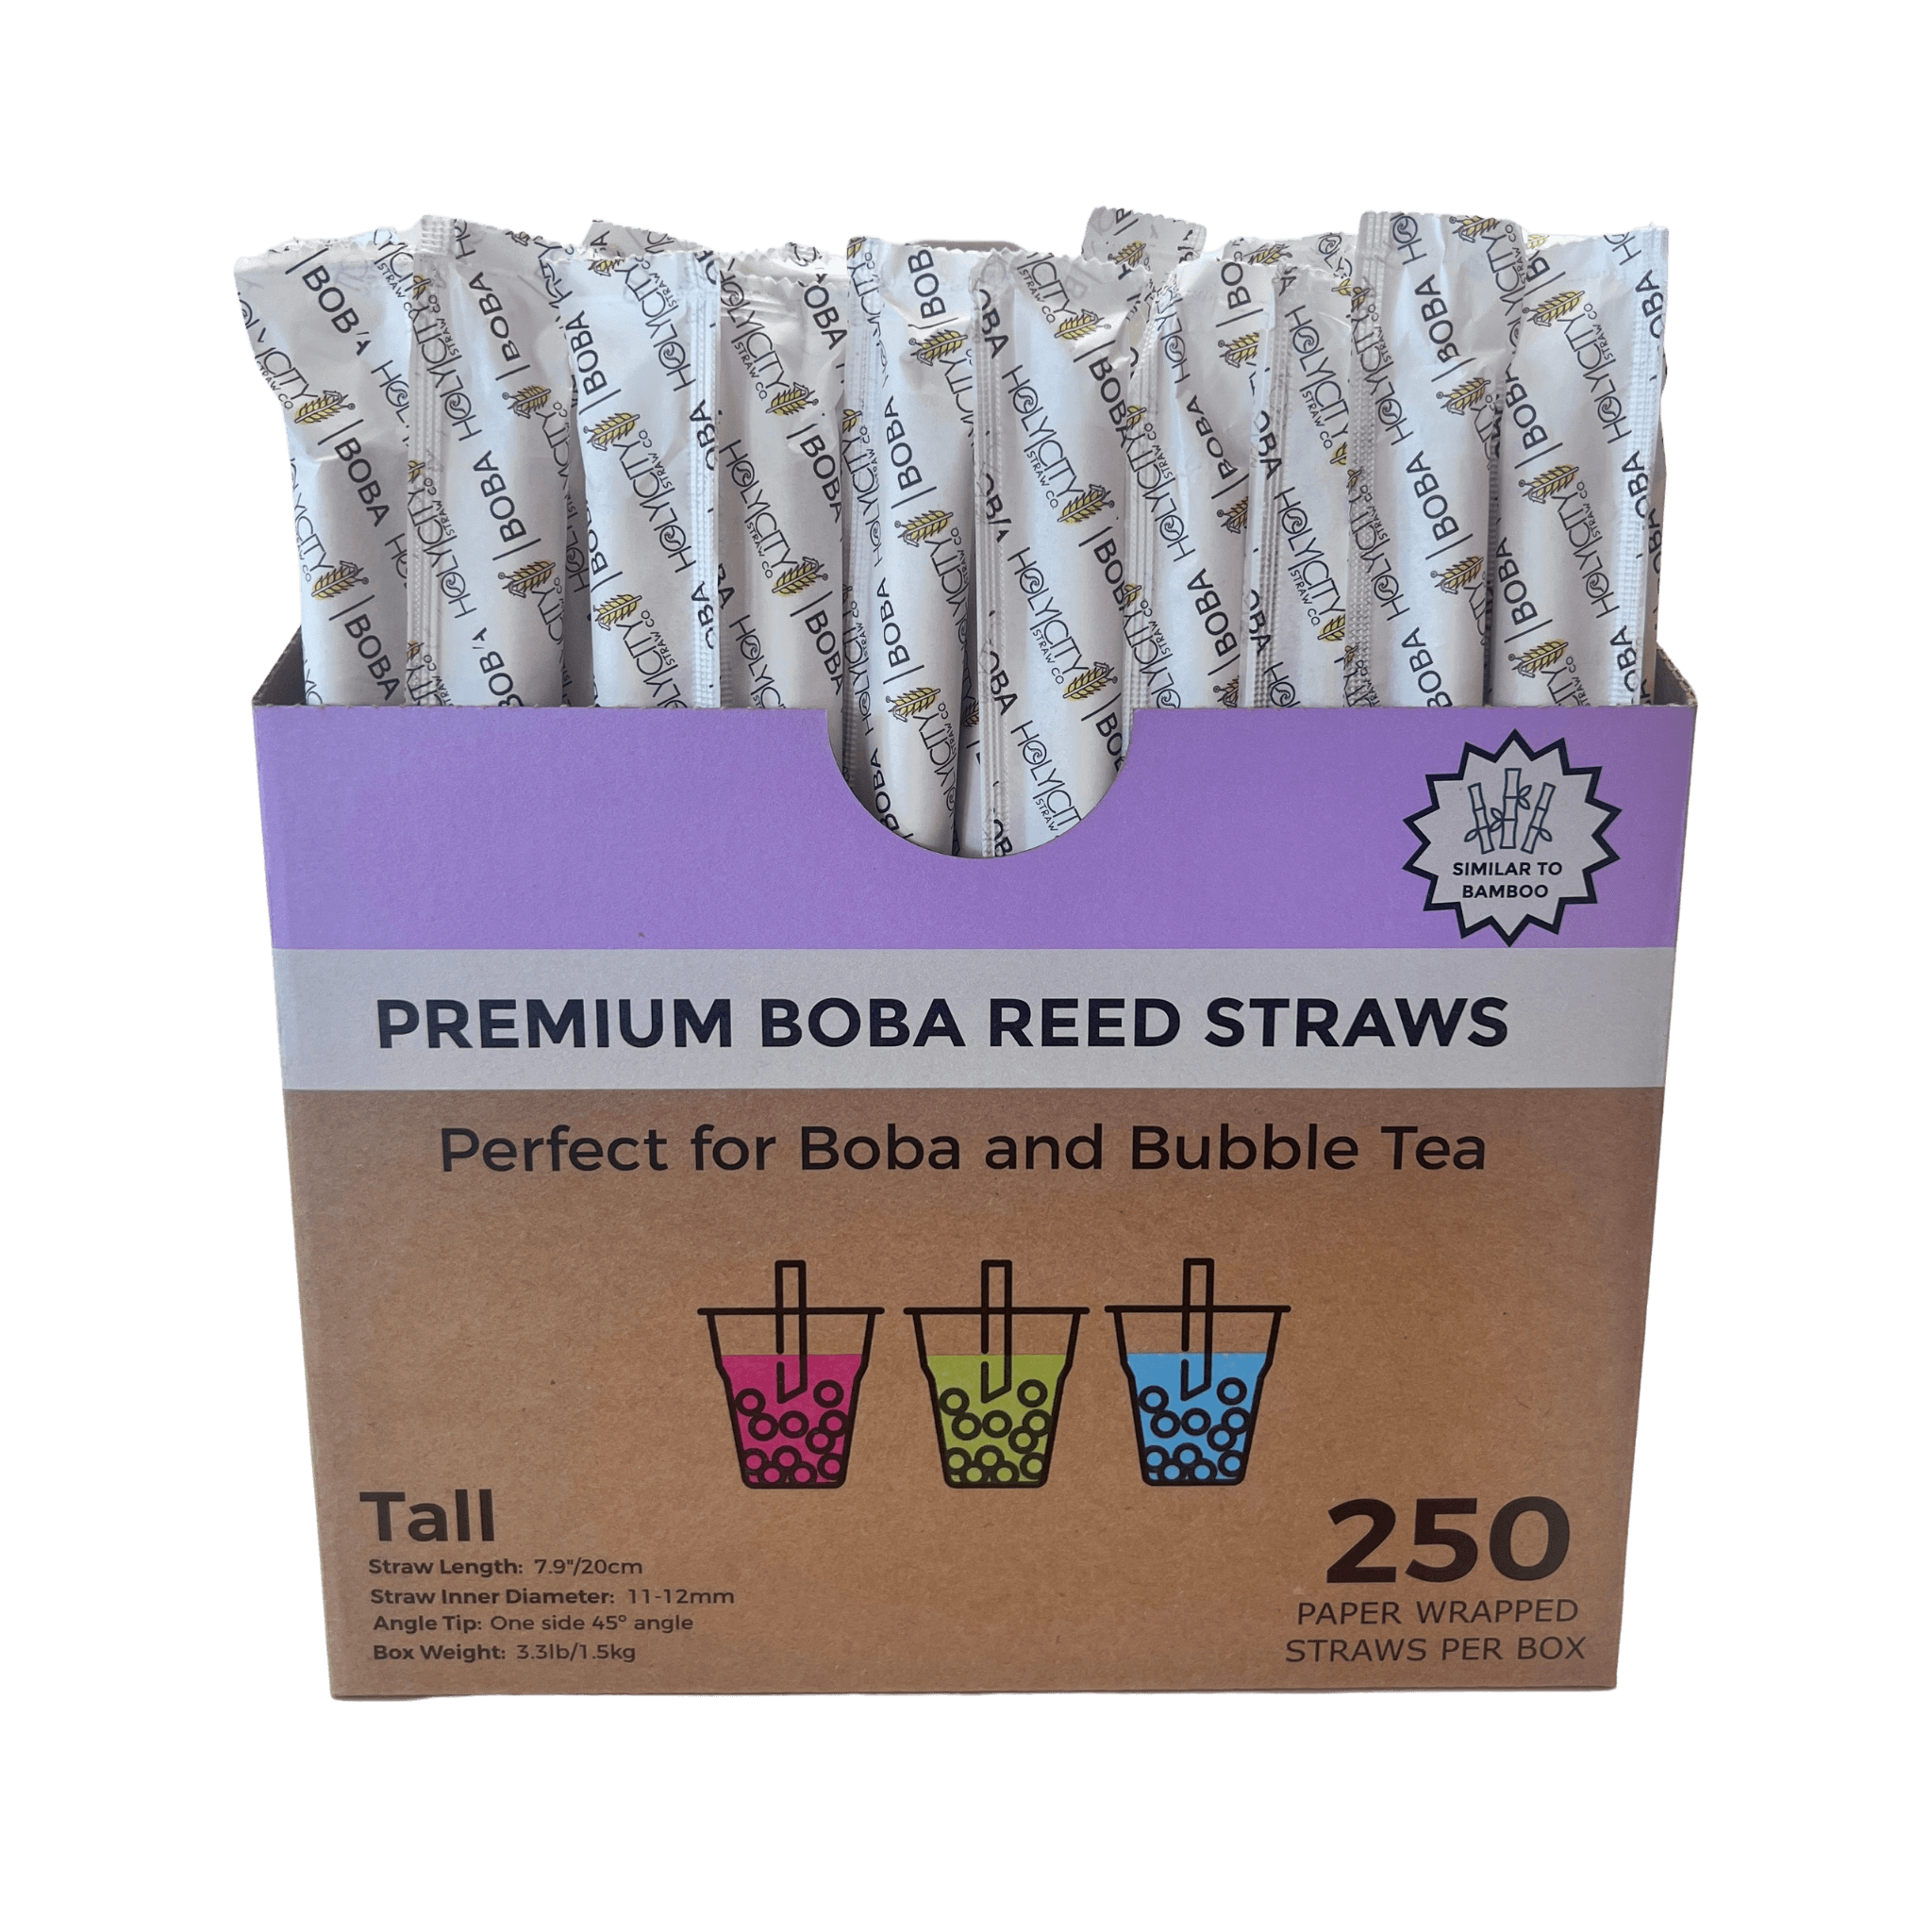 Holy City Straw Co wrapped boba reed straws opened box of 250ct transparent